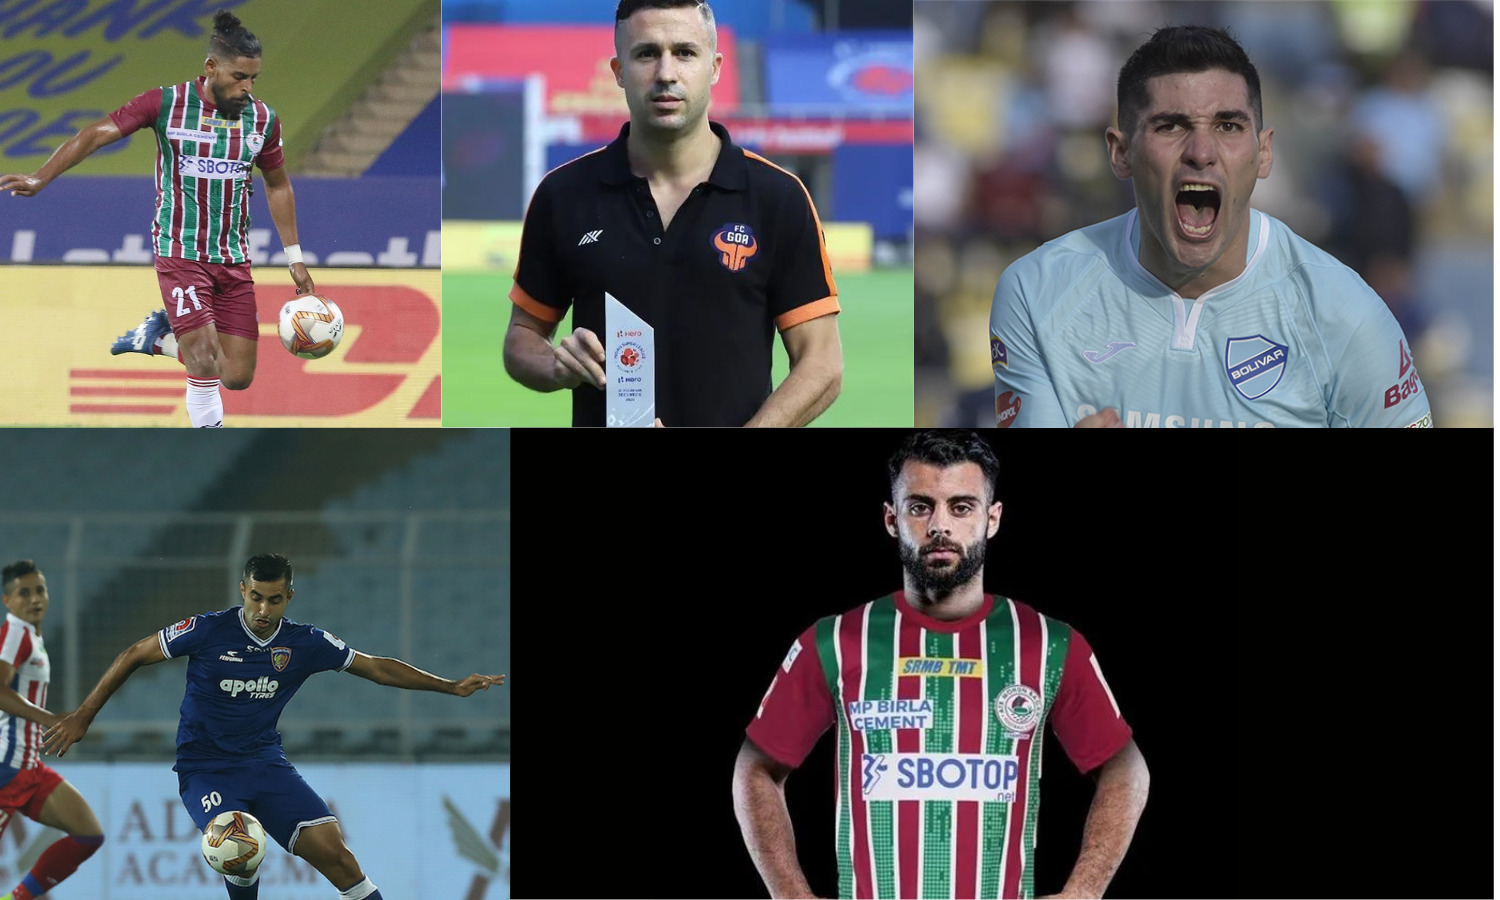 Hero Indian Super League to feature in EA SPORTS™ FIFA 22